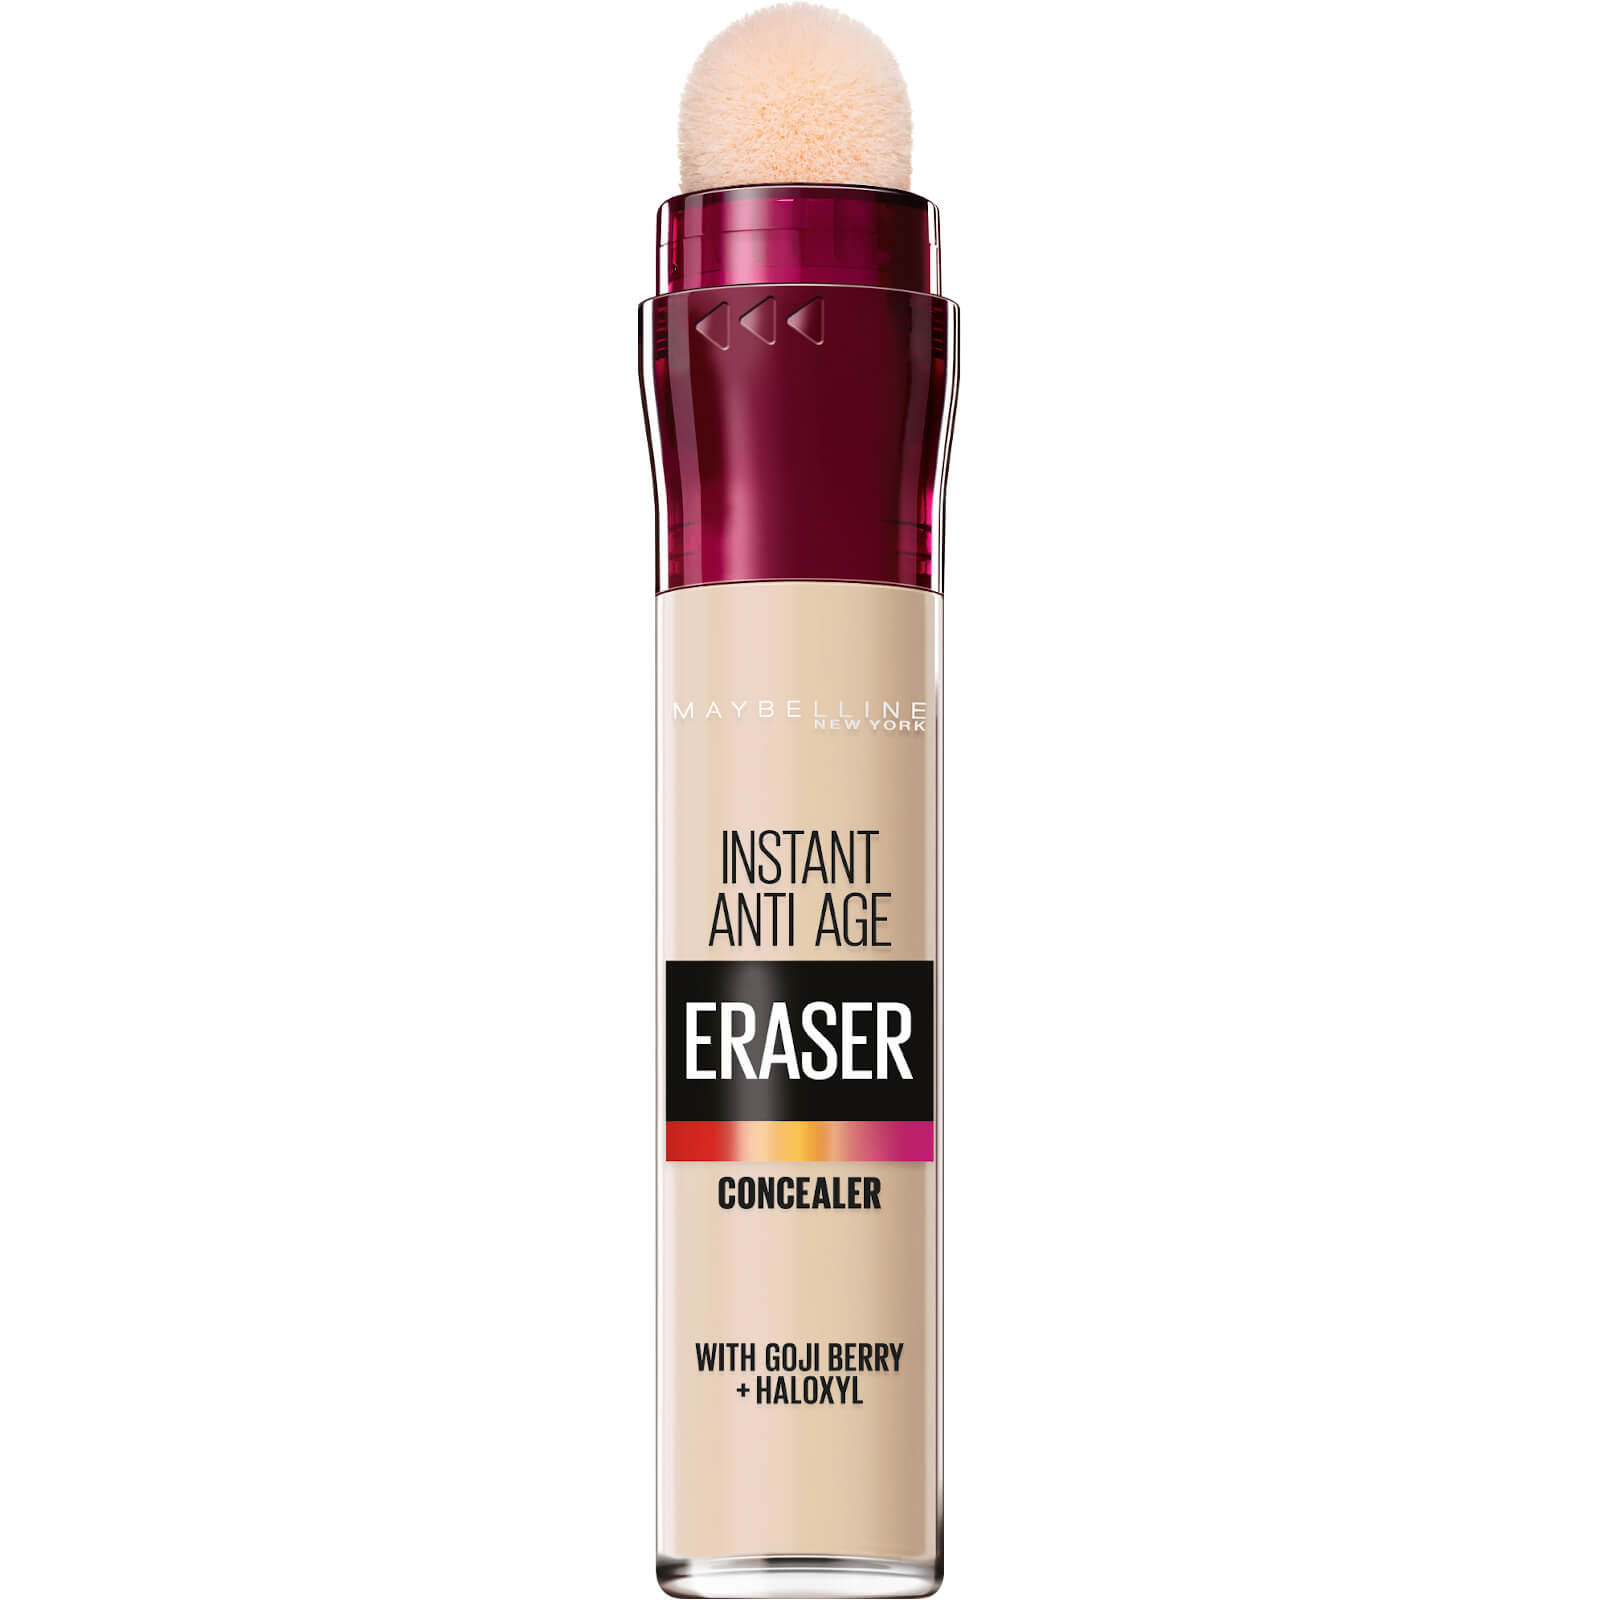 Maybelline Instant Anti Age Eraser Concealer 6.8ml (Various Shades) - 16 00 Ivory